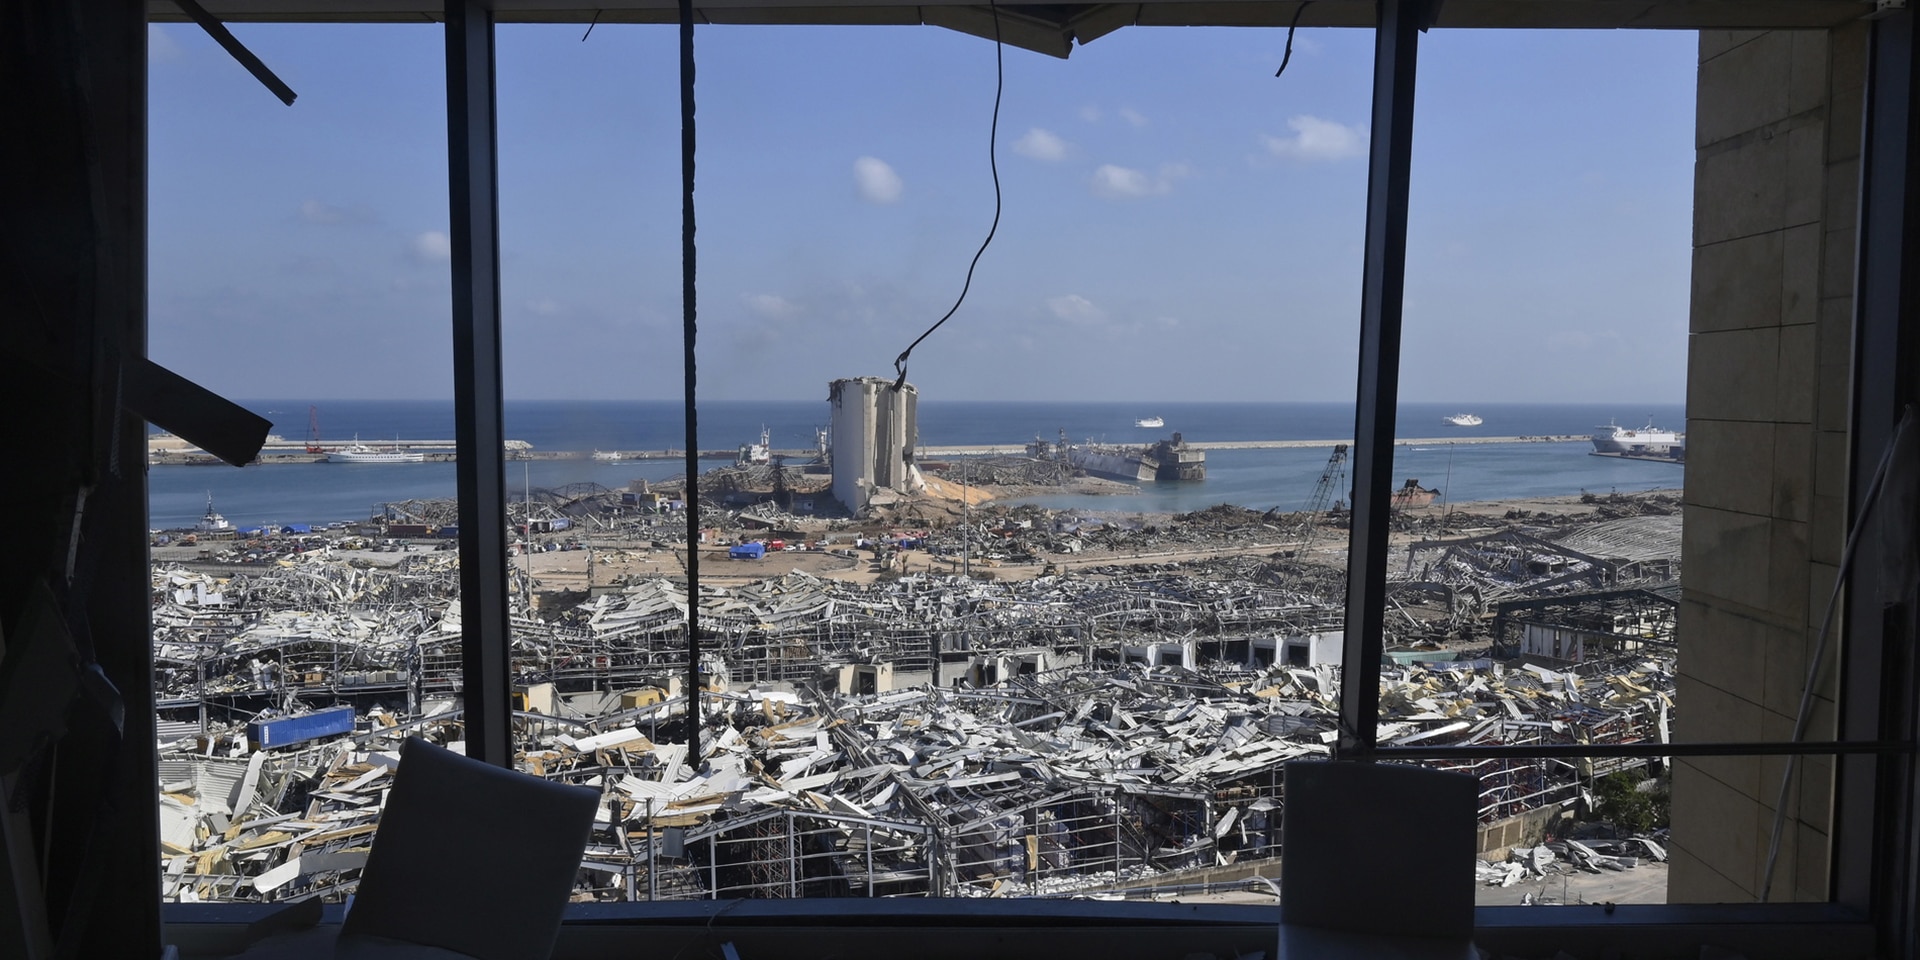 Description View from a window of the port and part of the city of Beirut following the tragic explosion on 4 August 2020.